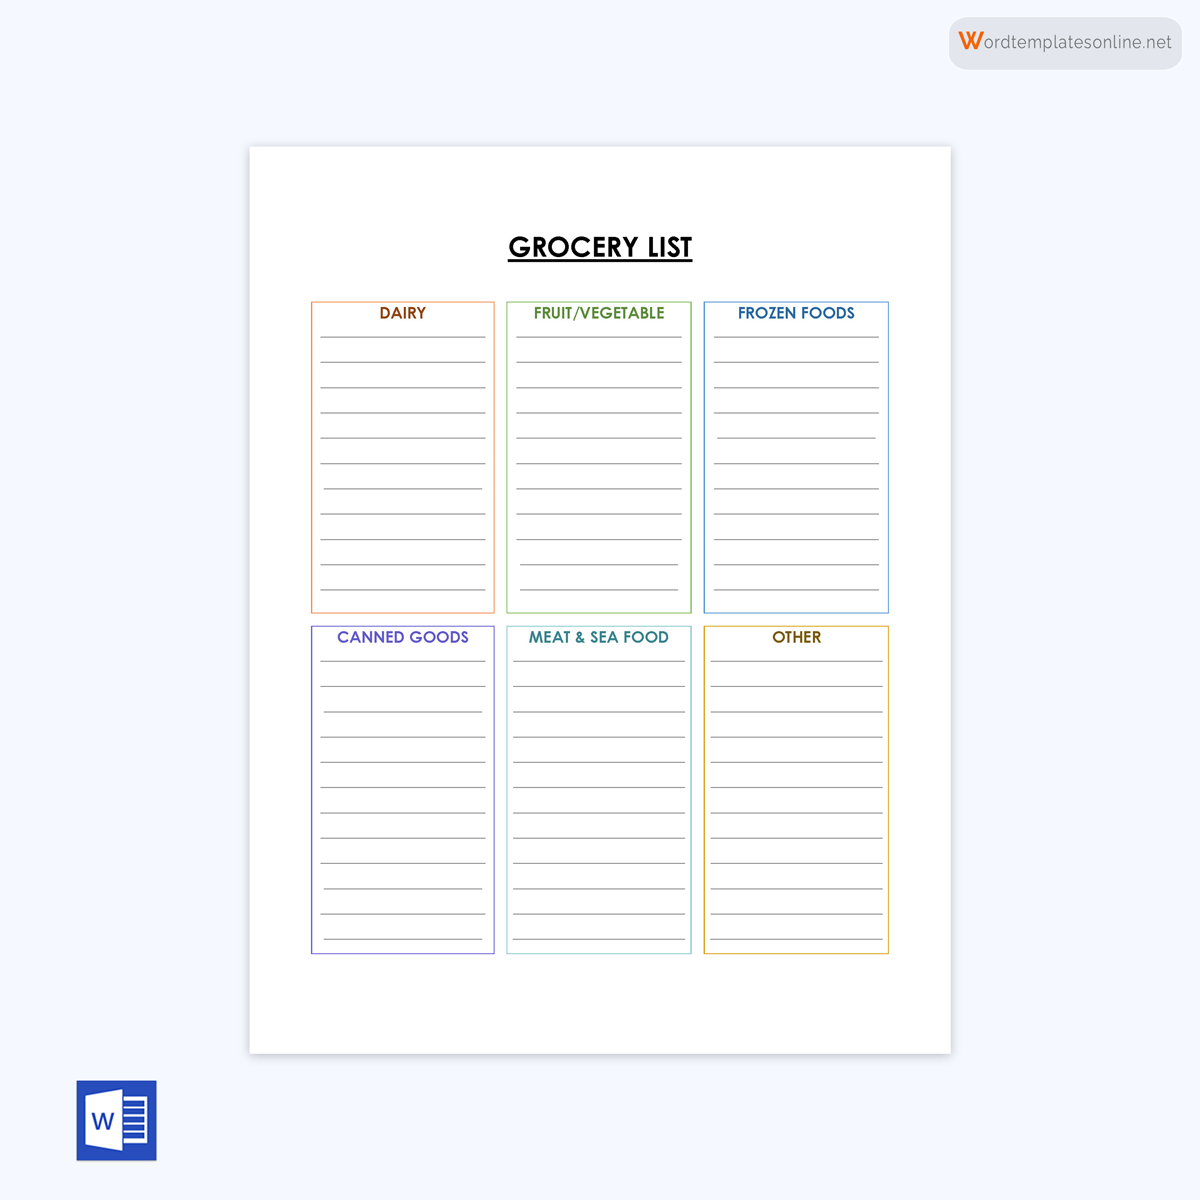 Sample Grocery List Template 01